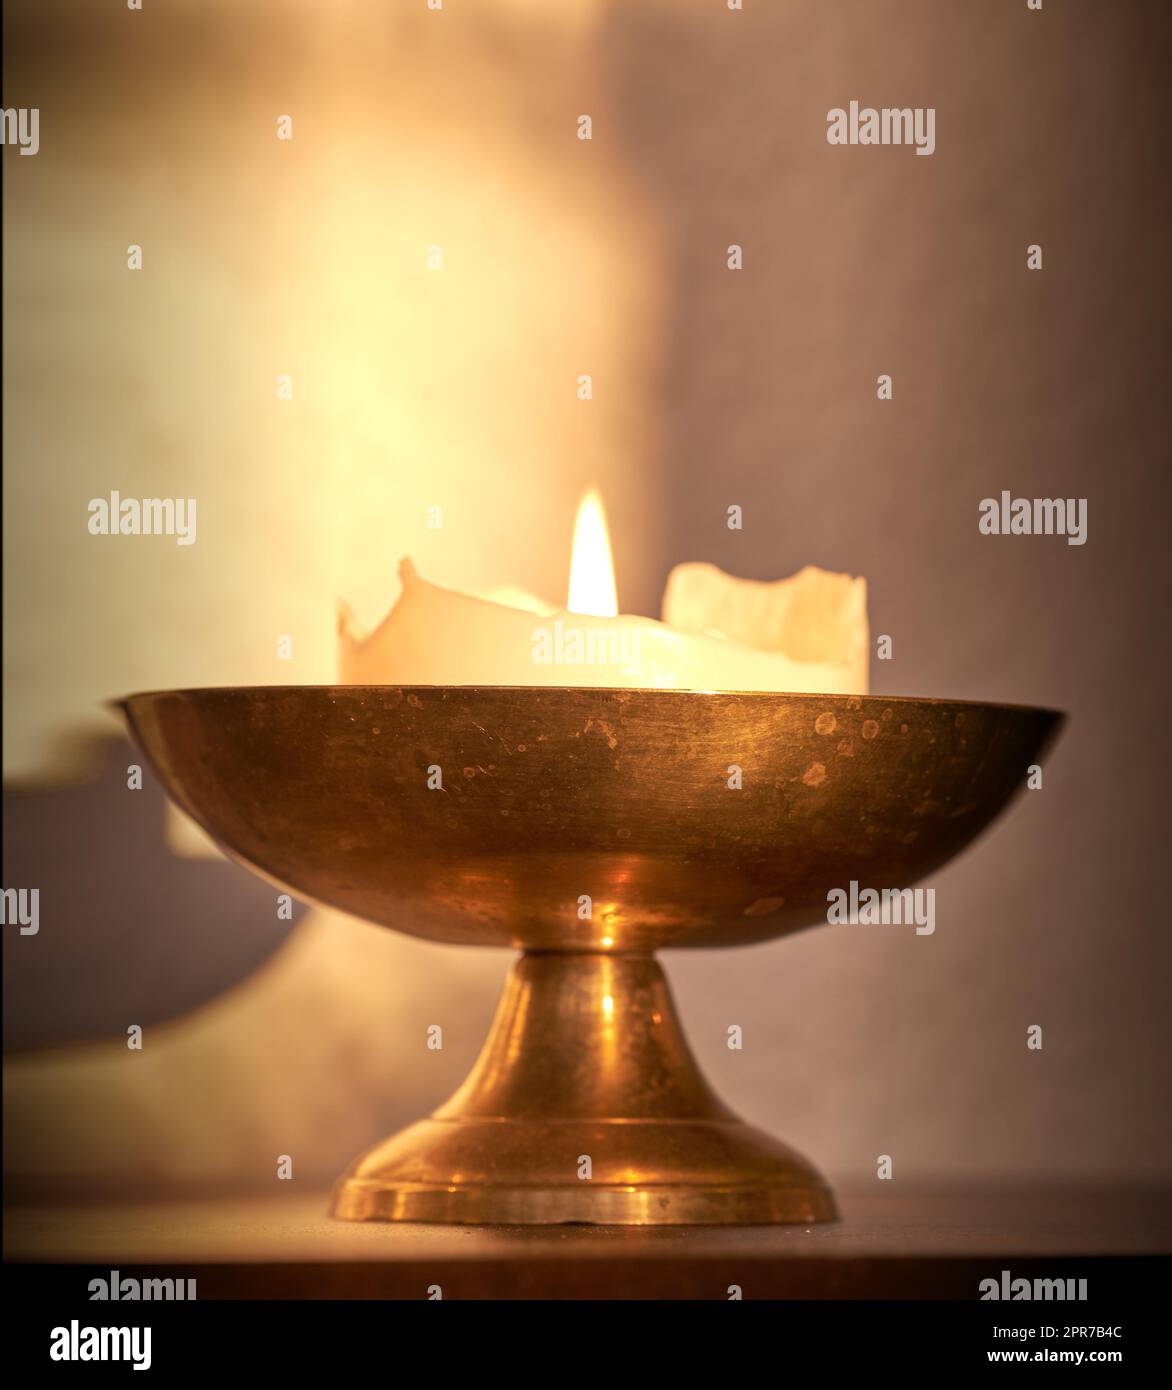 Lit candle on a table at home for warmth and brightness. Beautiful house decoration used for aroma, good scent and to bring light to a room. Candles represent light, illumination, and purification Stock Photo